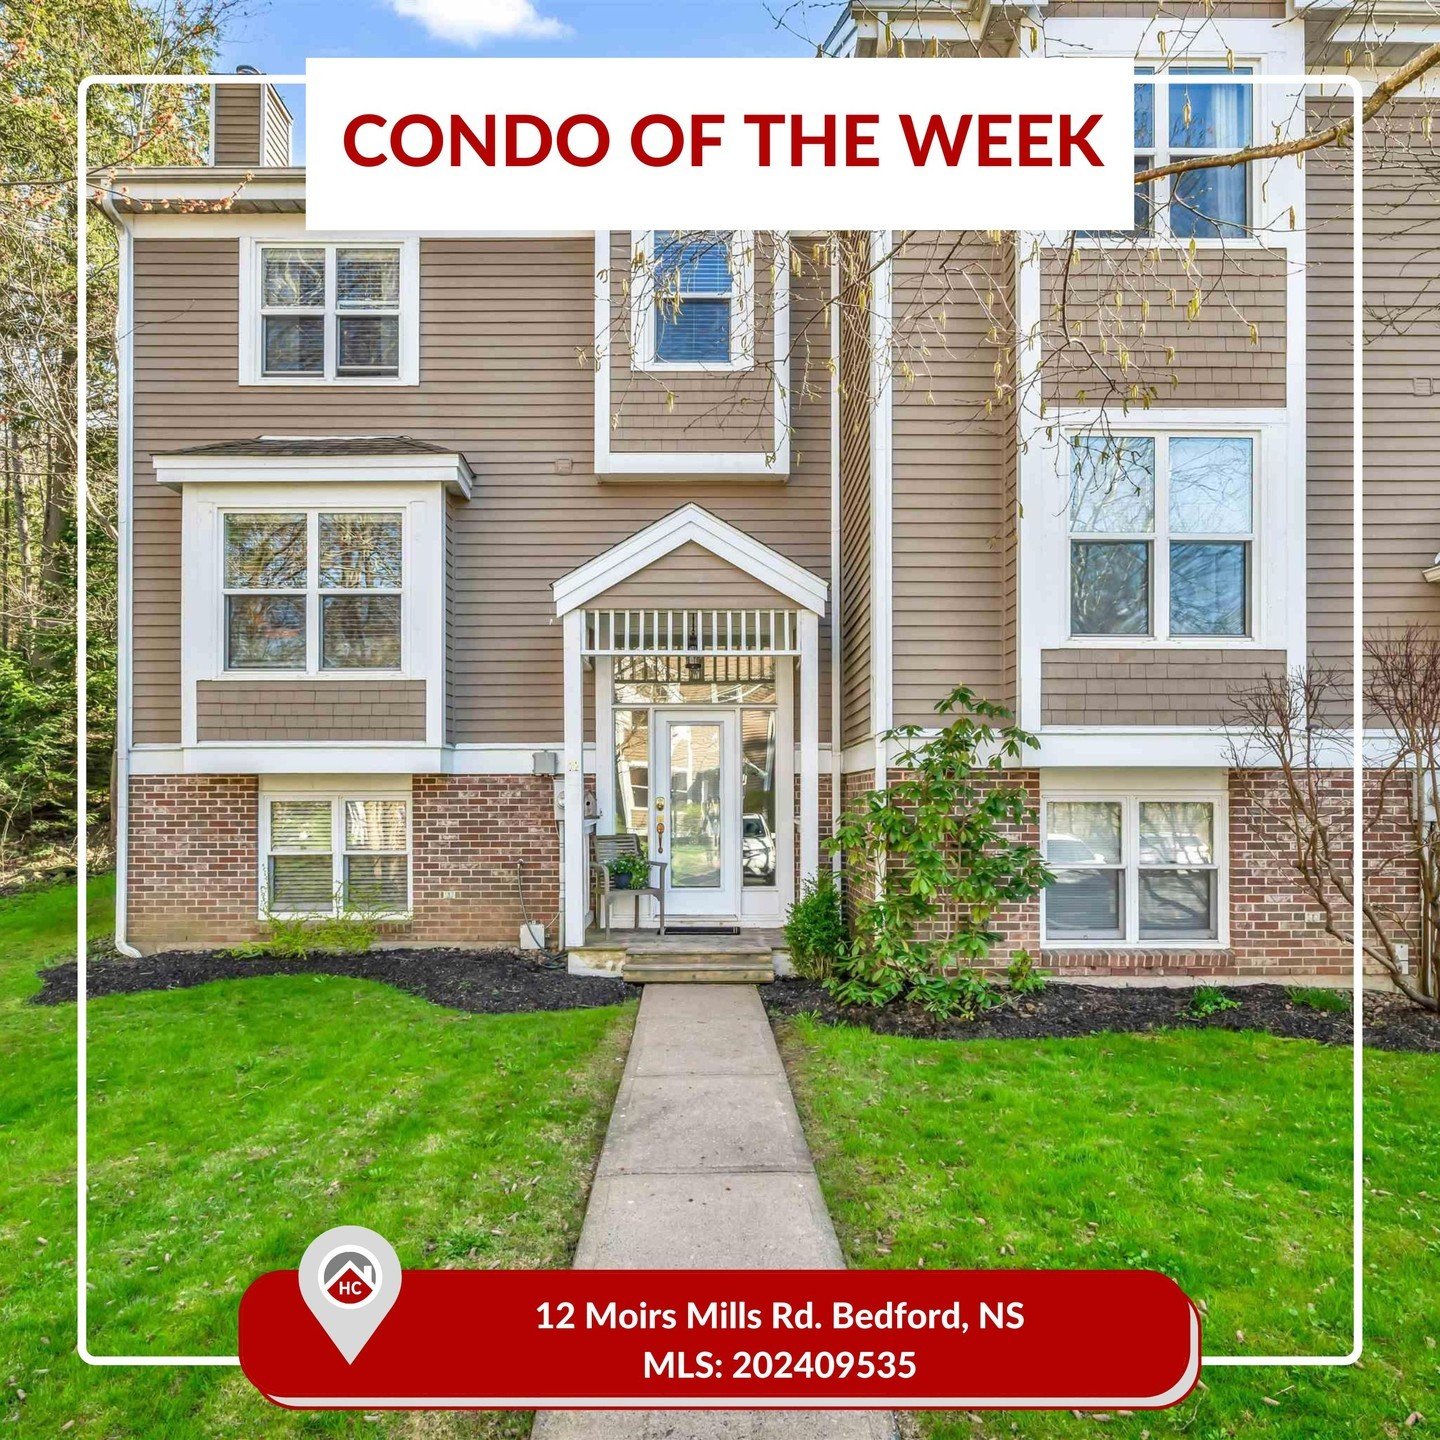 Featured Condo of the Week!
12 Moirs Mills Road 🤩
DM us to schedule a viewing!

🟢 Status: For Sale
💰 Price: $599,900
🛏️ 3 Bedrooms
🛁 3.5 Bathrooms
📐 1,900 Square Feet

🏠 Listing Agent: @andy_sawler_realtor (Sawler Group) with RE/MAX Nova

Bedf